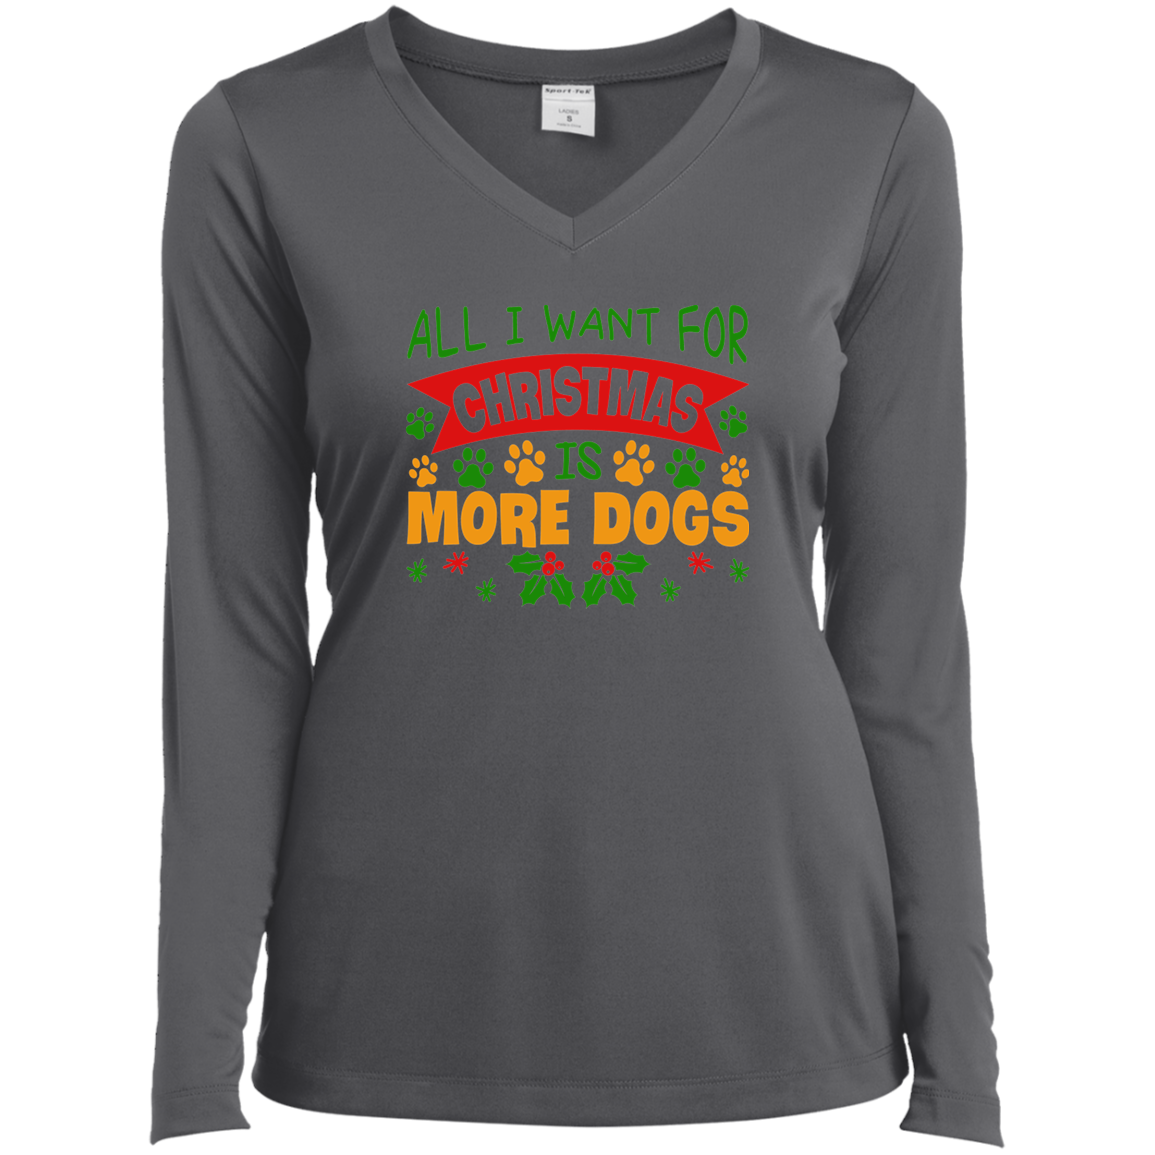 All I Want for Christmas is More Dogs Ladies’ Long Sleeve Performance V-Neck Tee